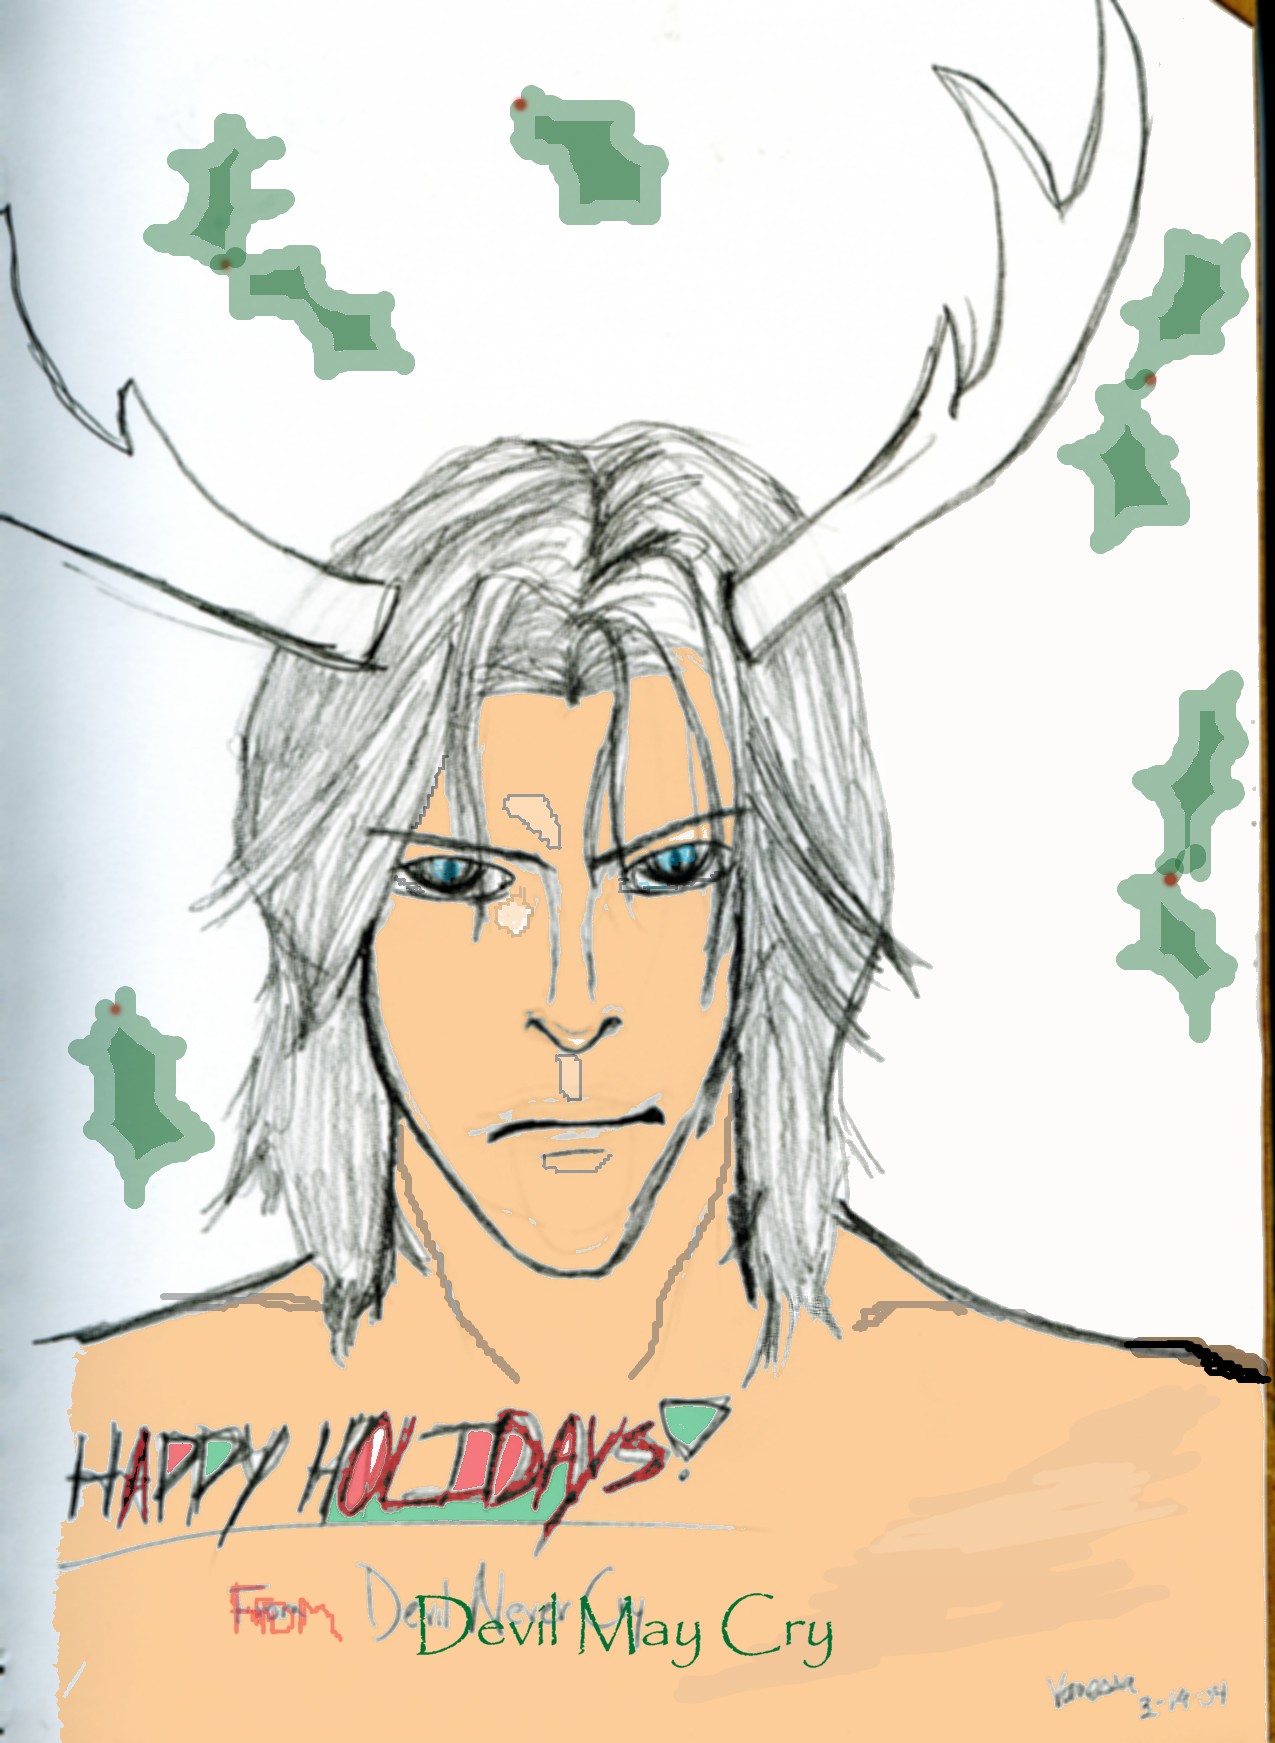 Dante wishes you a happy Holidoom! by PapercutDevil